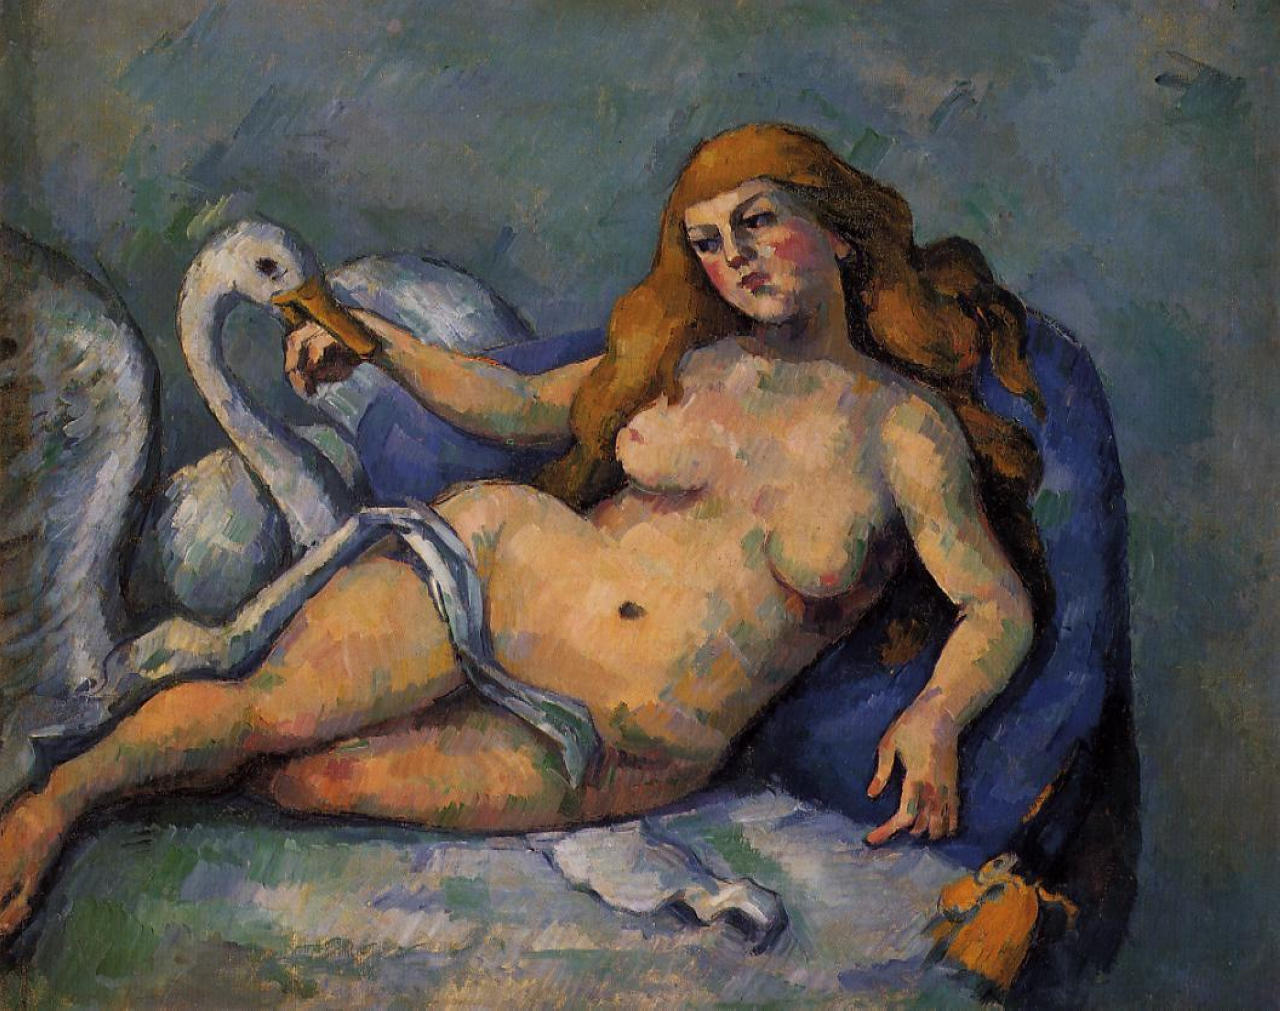 Leda and the Swan by Paul Cézanne - c. 1882 - 59.7 x 74.9 cm The Barnes Foundation